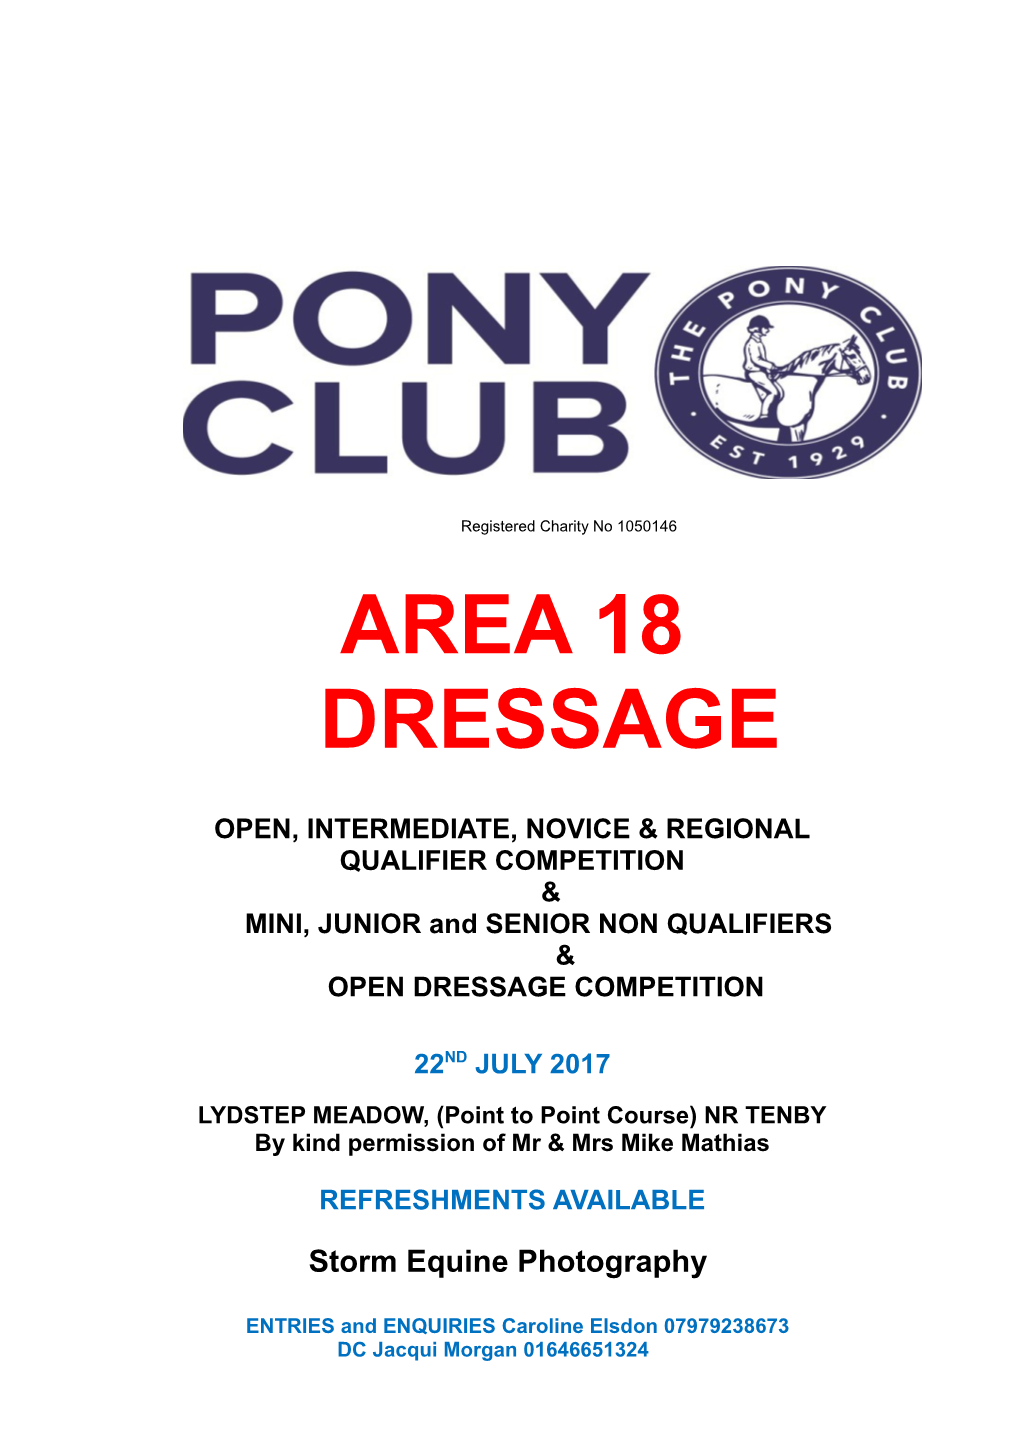 South Pembrokeshire Hunt Branch of the Pony Club